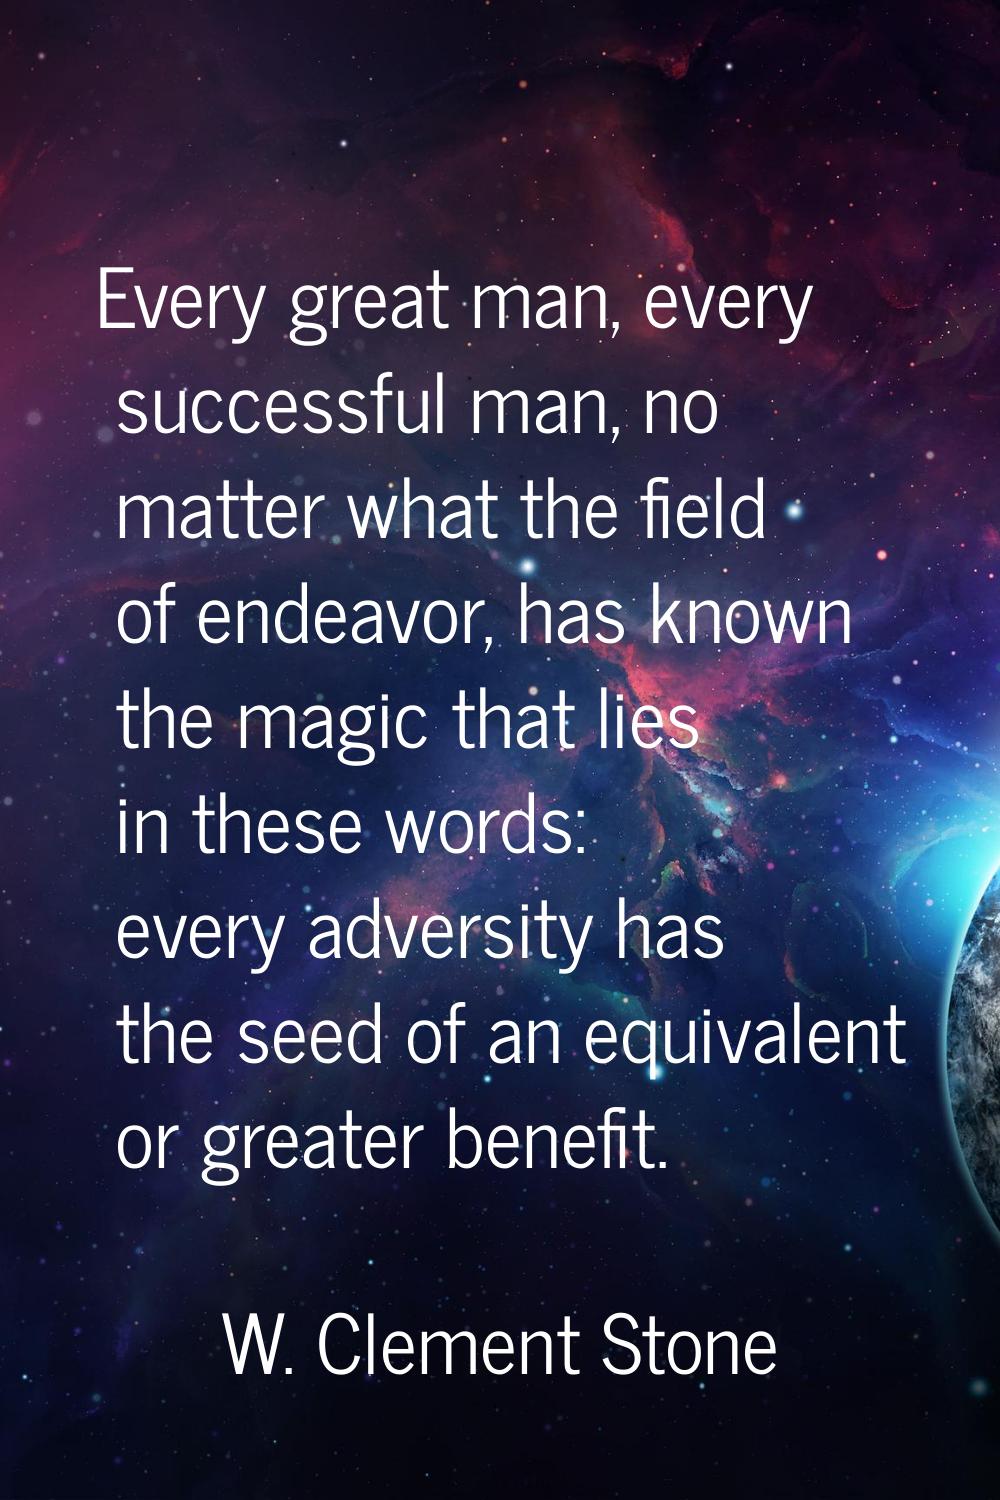 Every great man, every successful man, no matter what the field of endeavor, has known the magic th